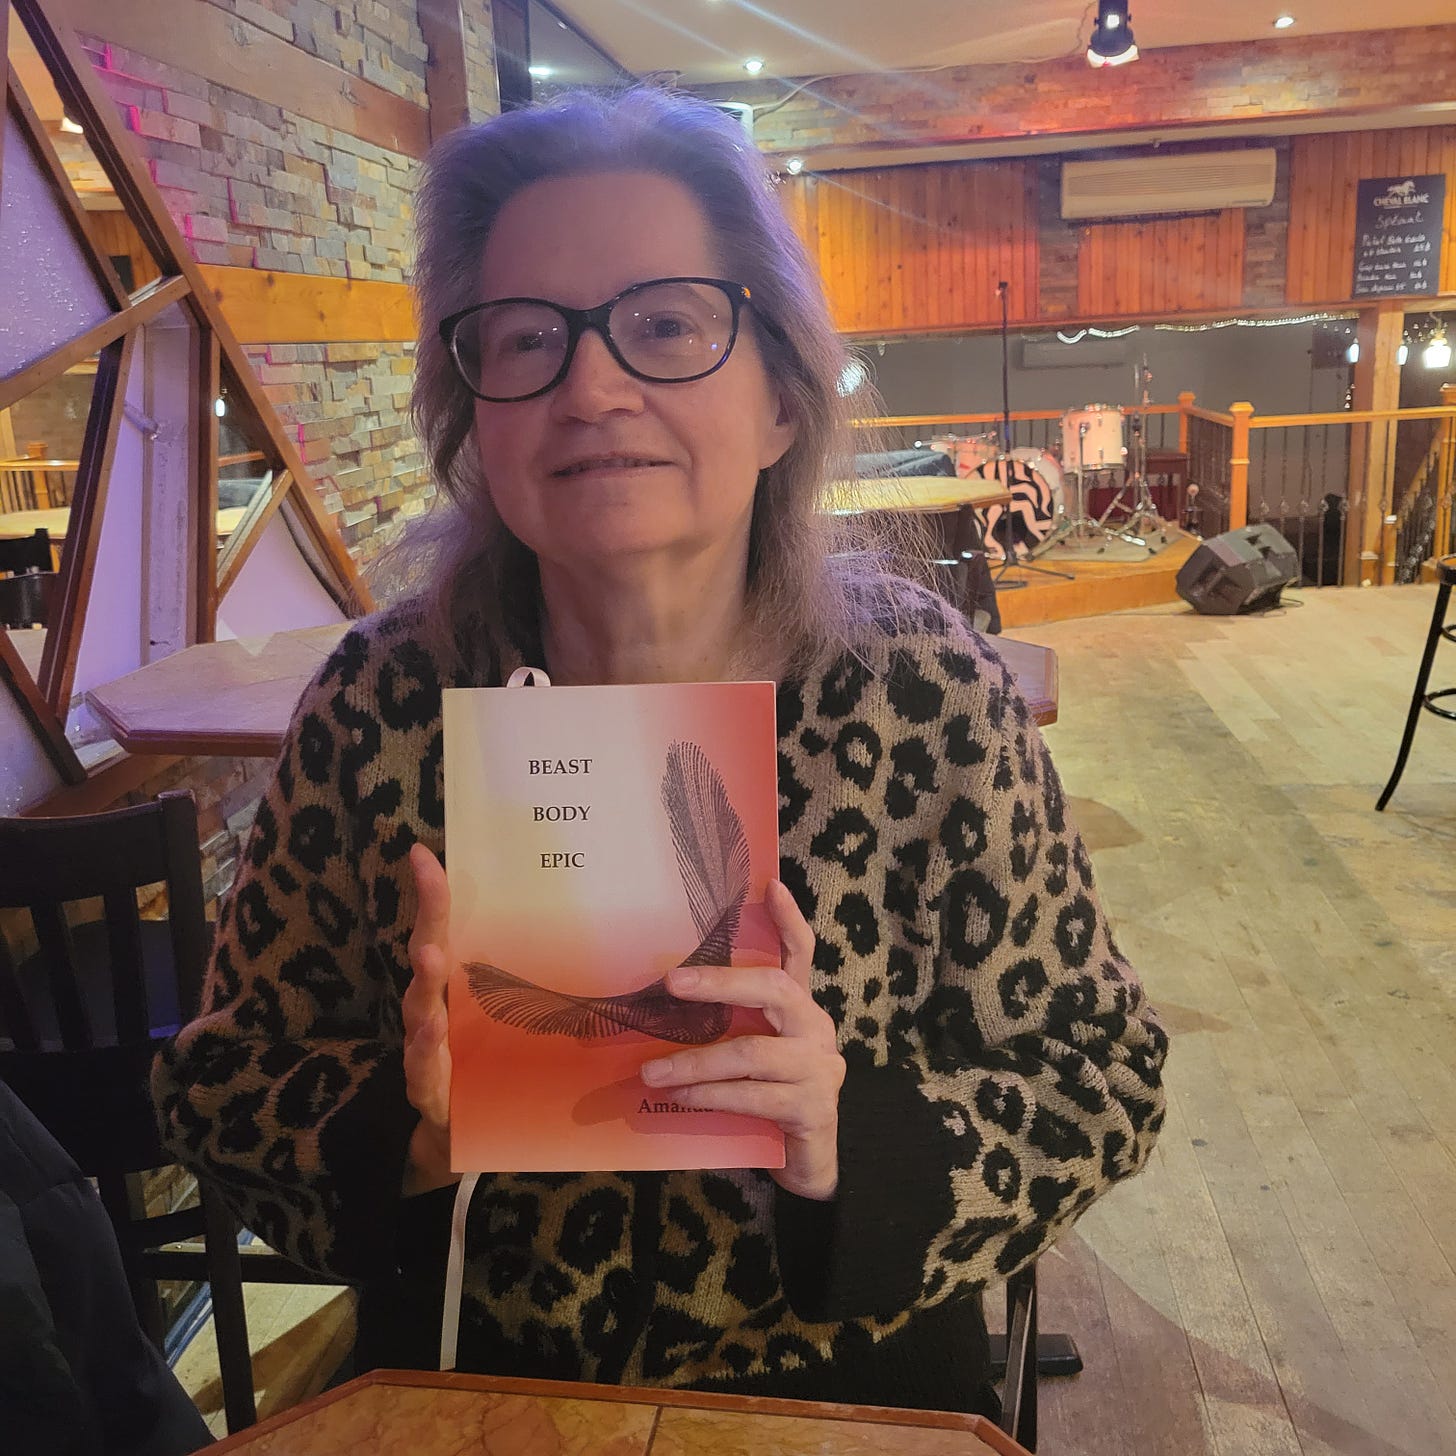 Amanda, wearing a leopard print sweater, sits in a bar at a table and holds a copy of Beast Body Epic, a book with red and black cover and a visual poem.